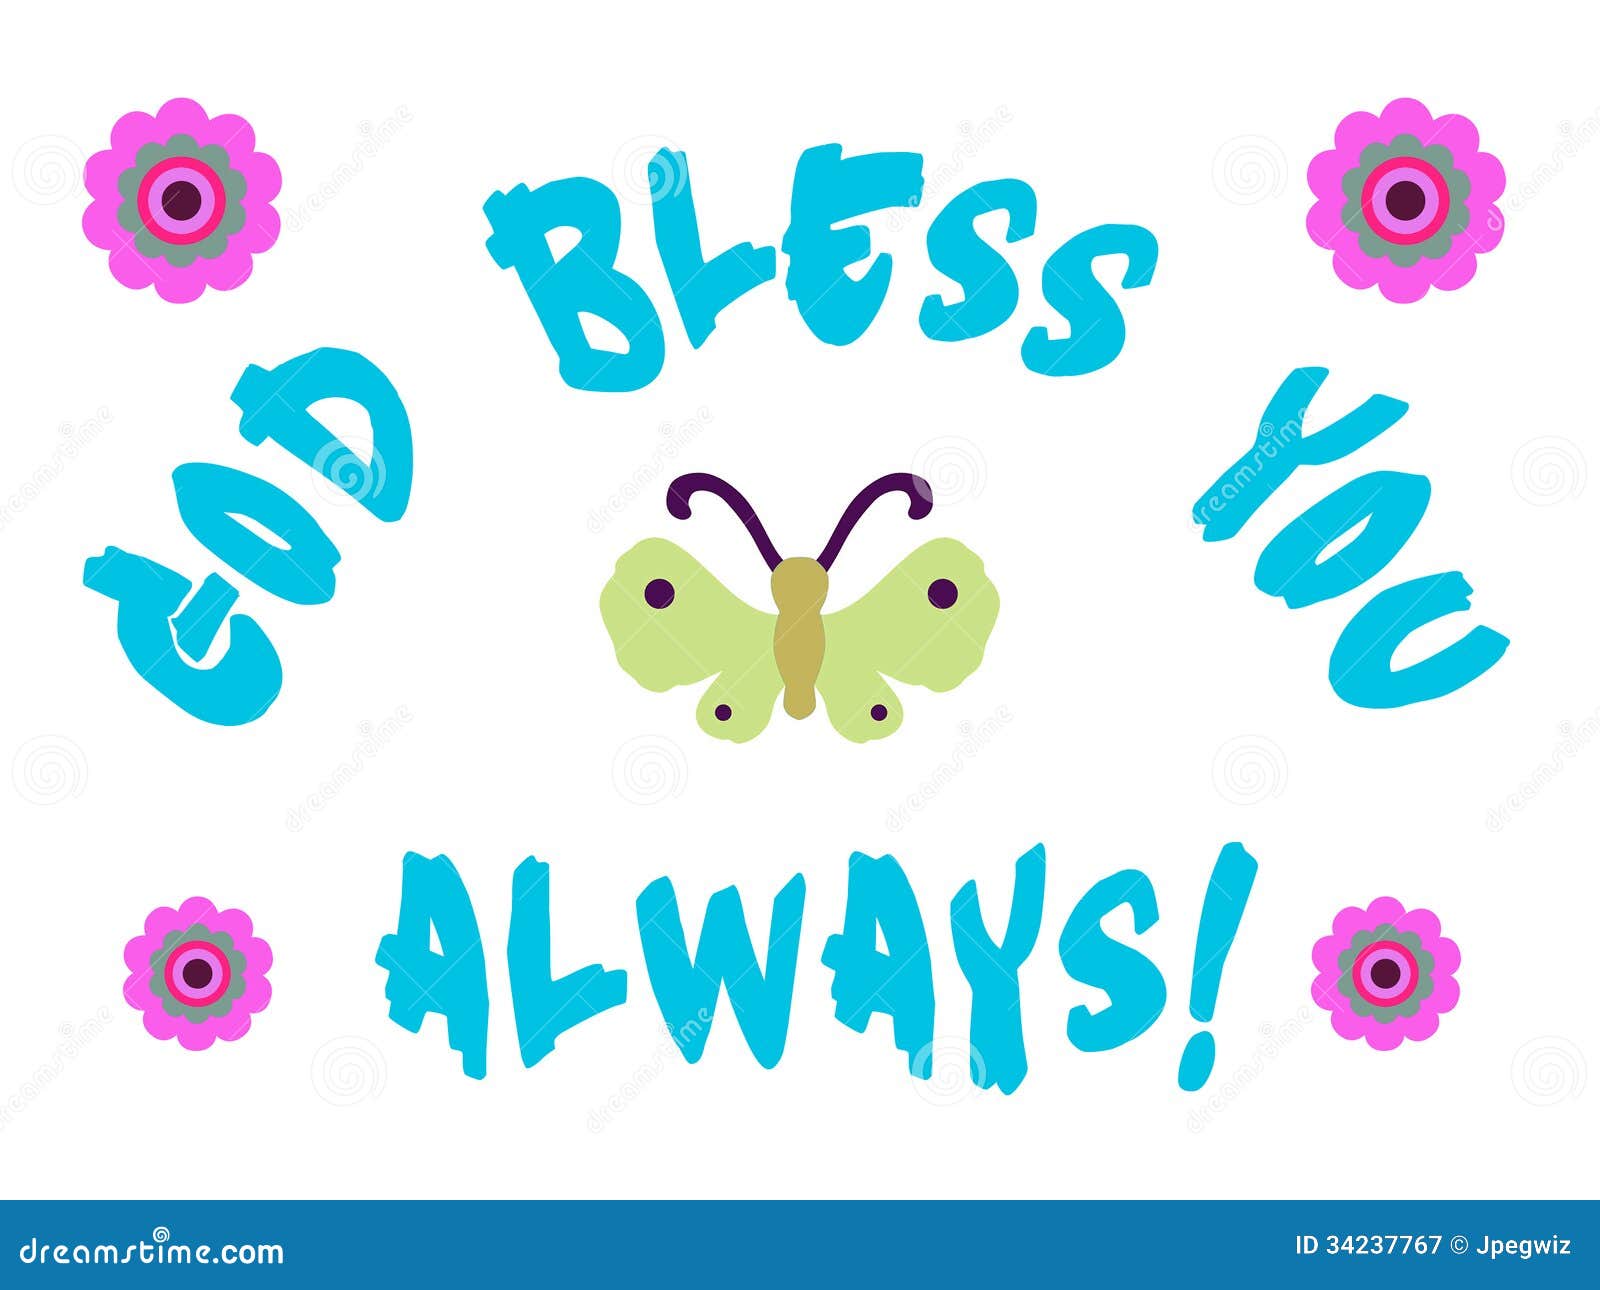 Bless You Stock Illustrations – 792 Bless You Stock Illustrations ...